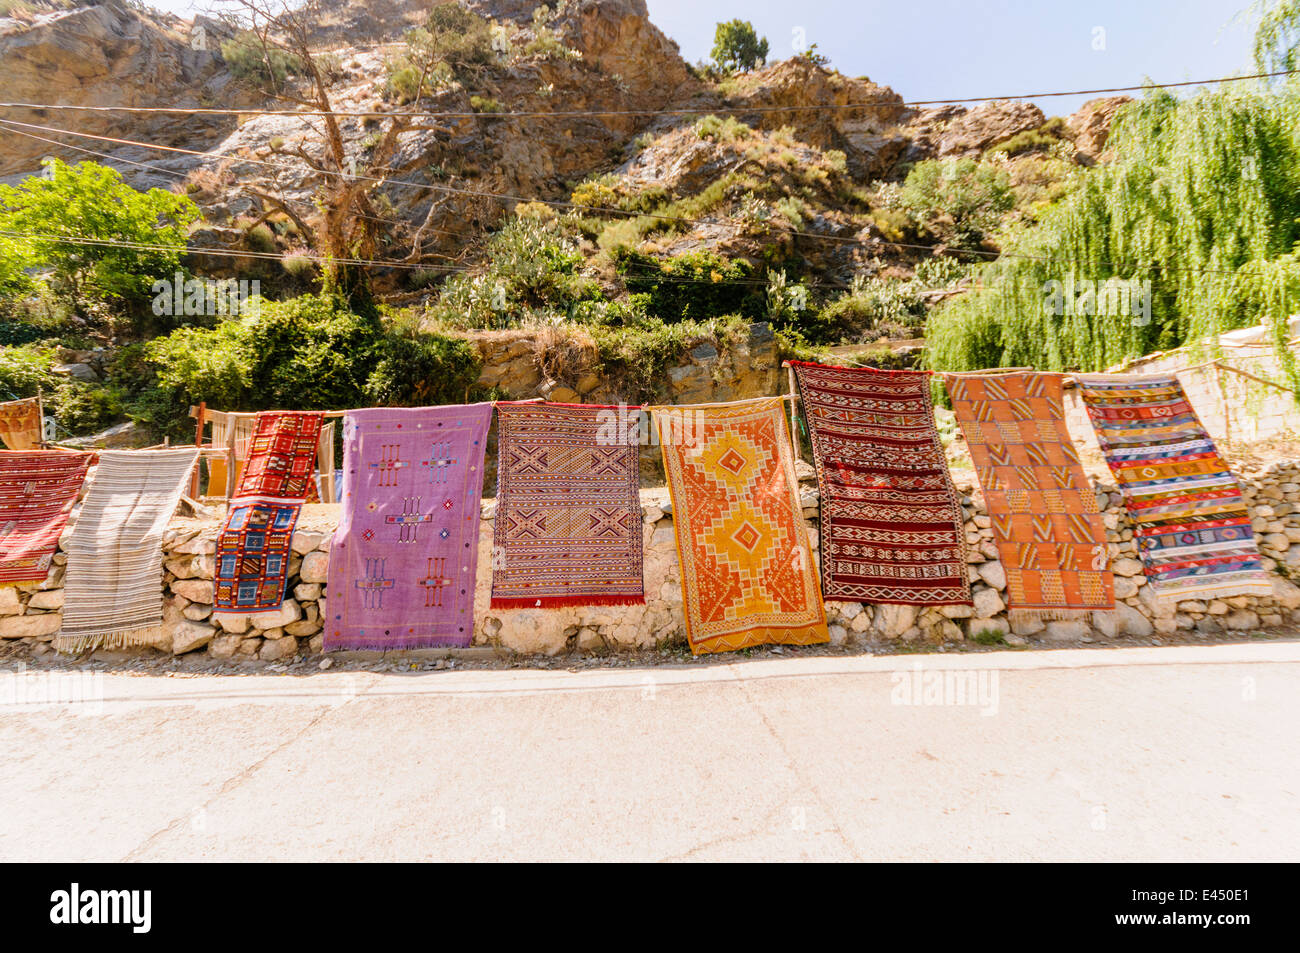 Moroccan handmade rugs for sale in a rural village in the Atlas Mountains, Morocco Stock Photo